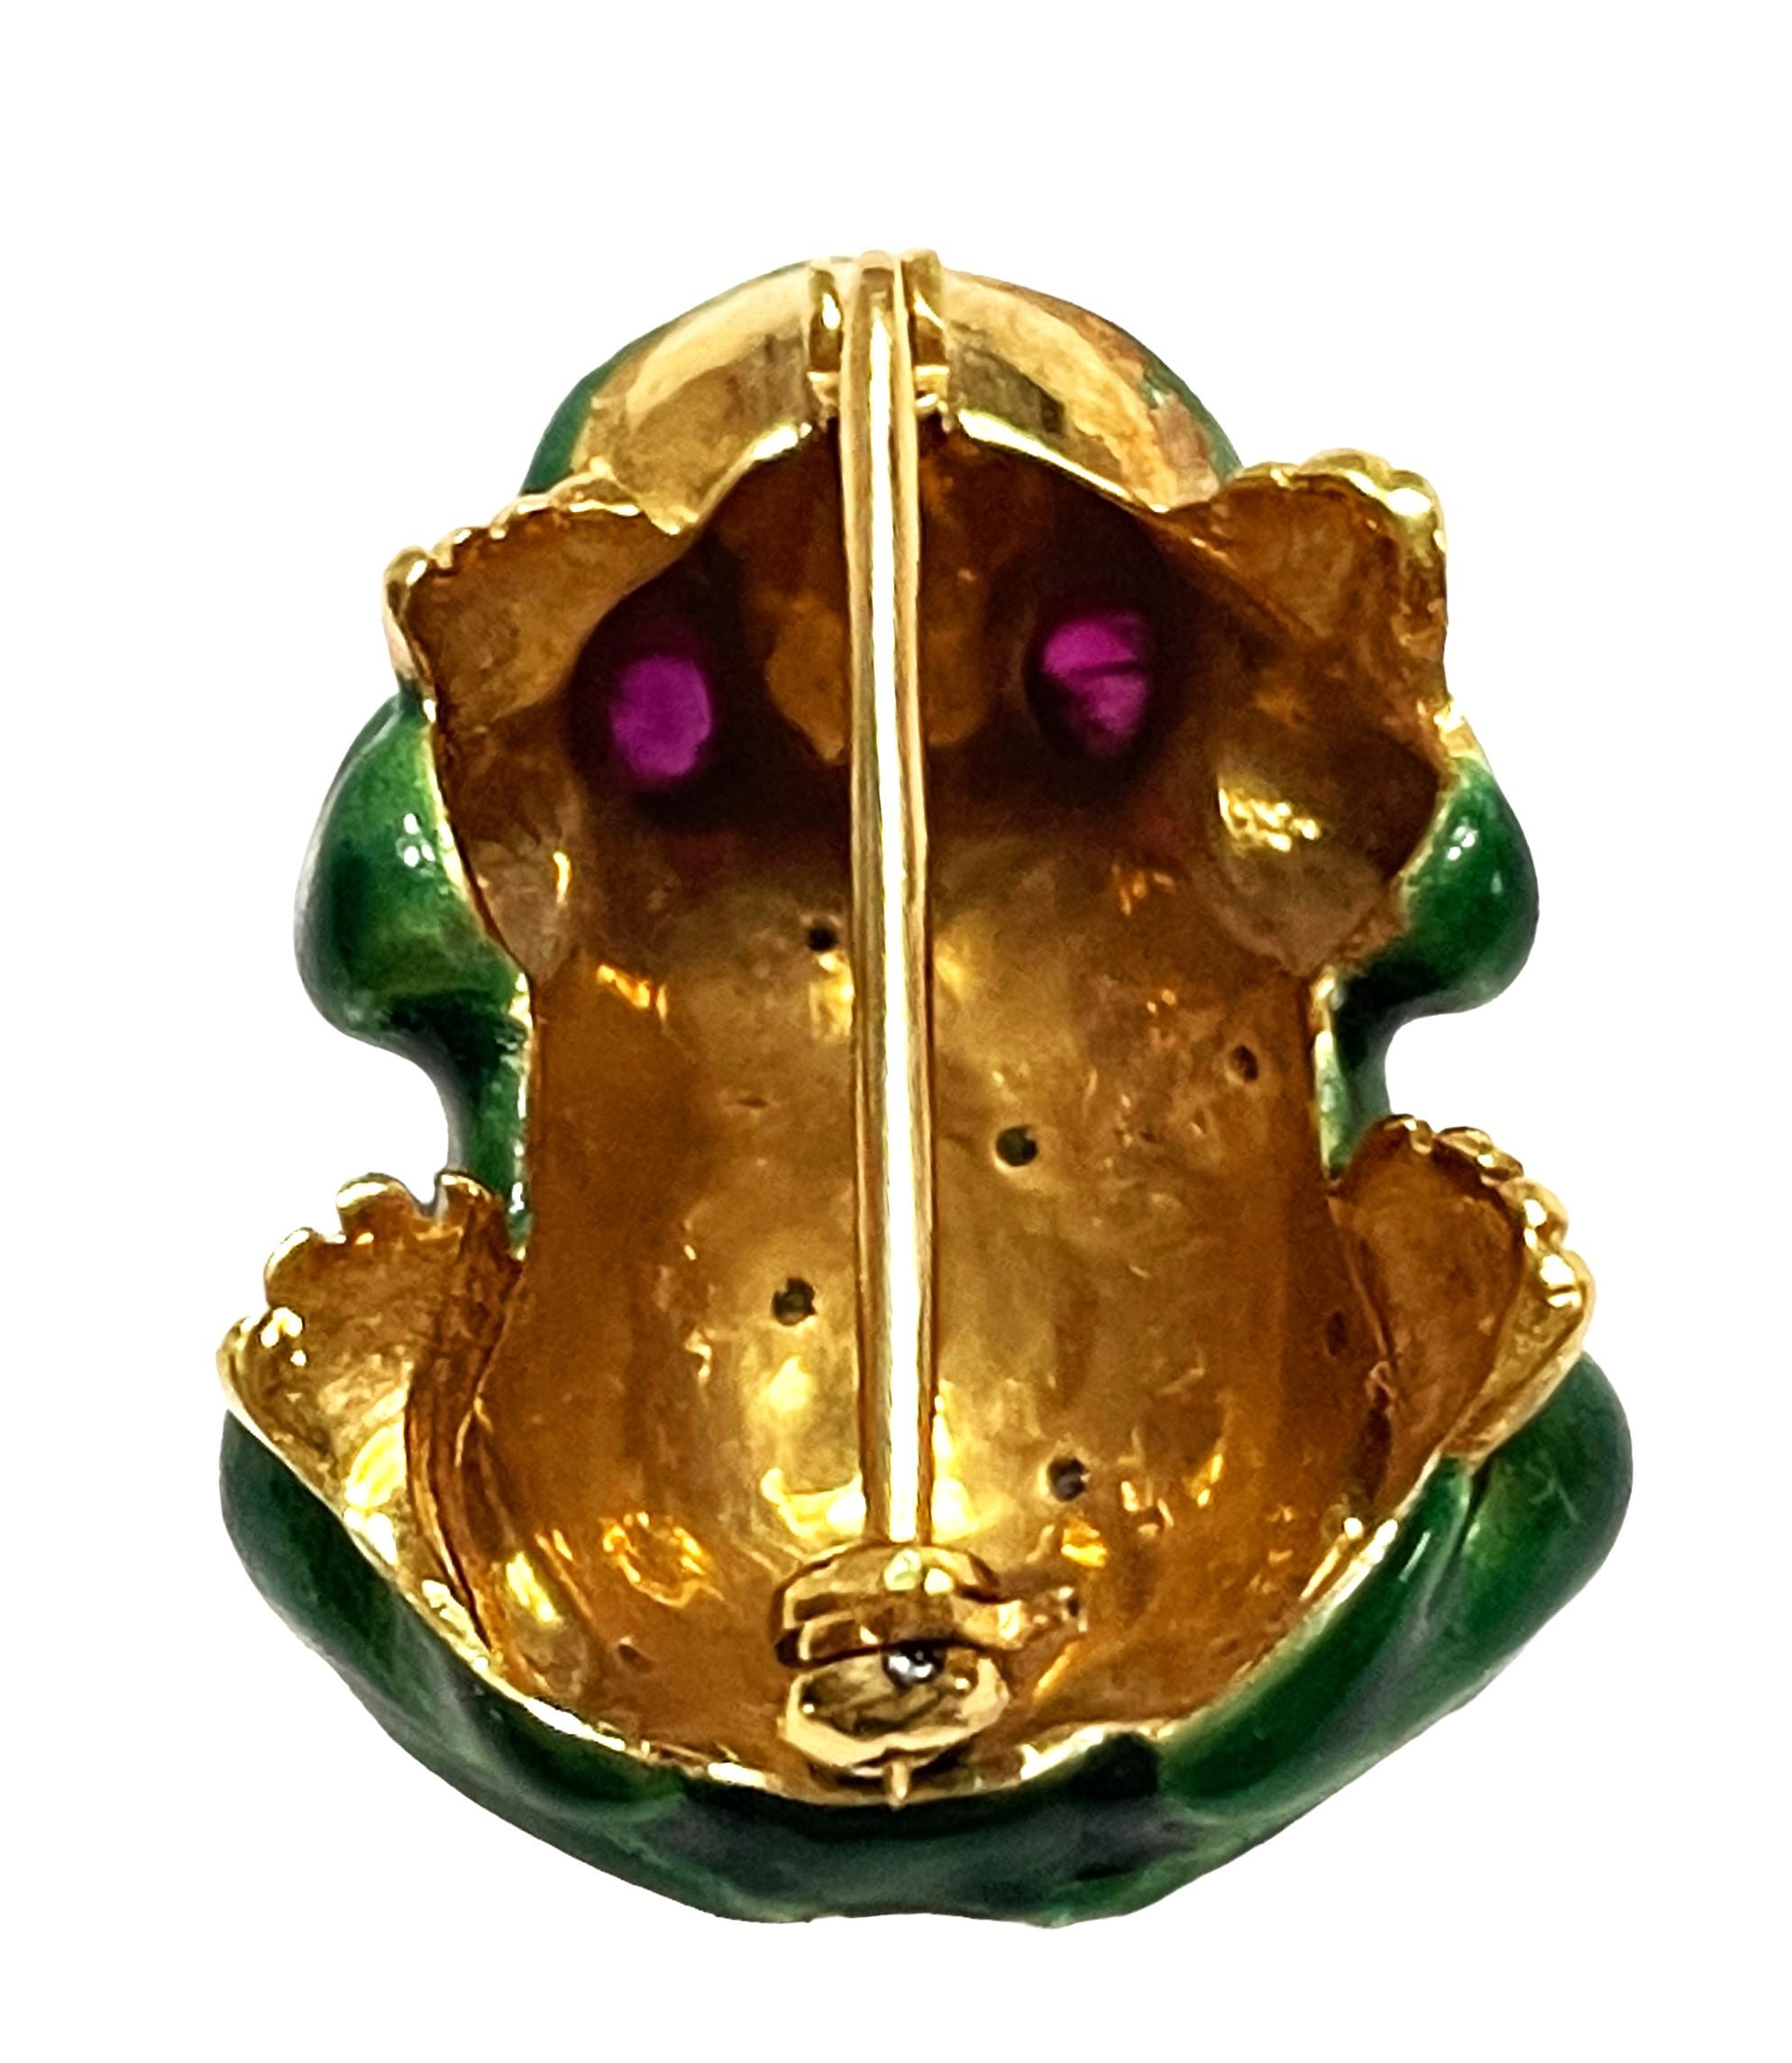 Handmade 21k Yellow Gold Enamel Frog Pin/Pedant with Ruby Eyes and Diamond Bumps 4